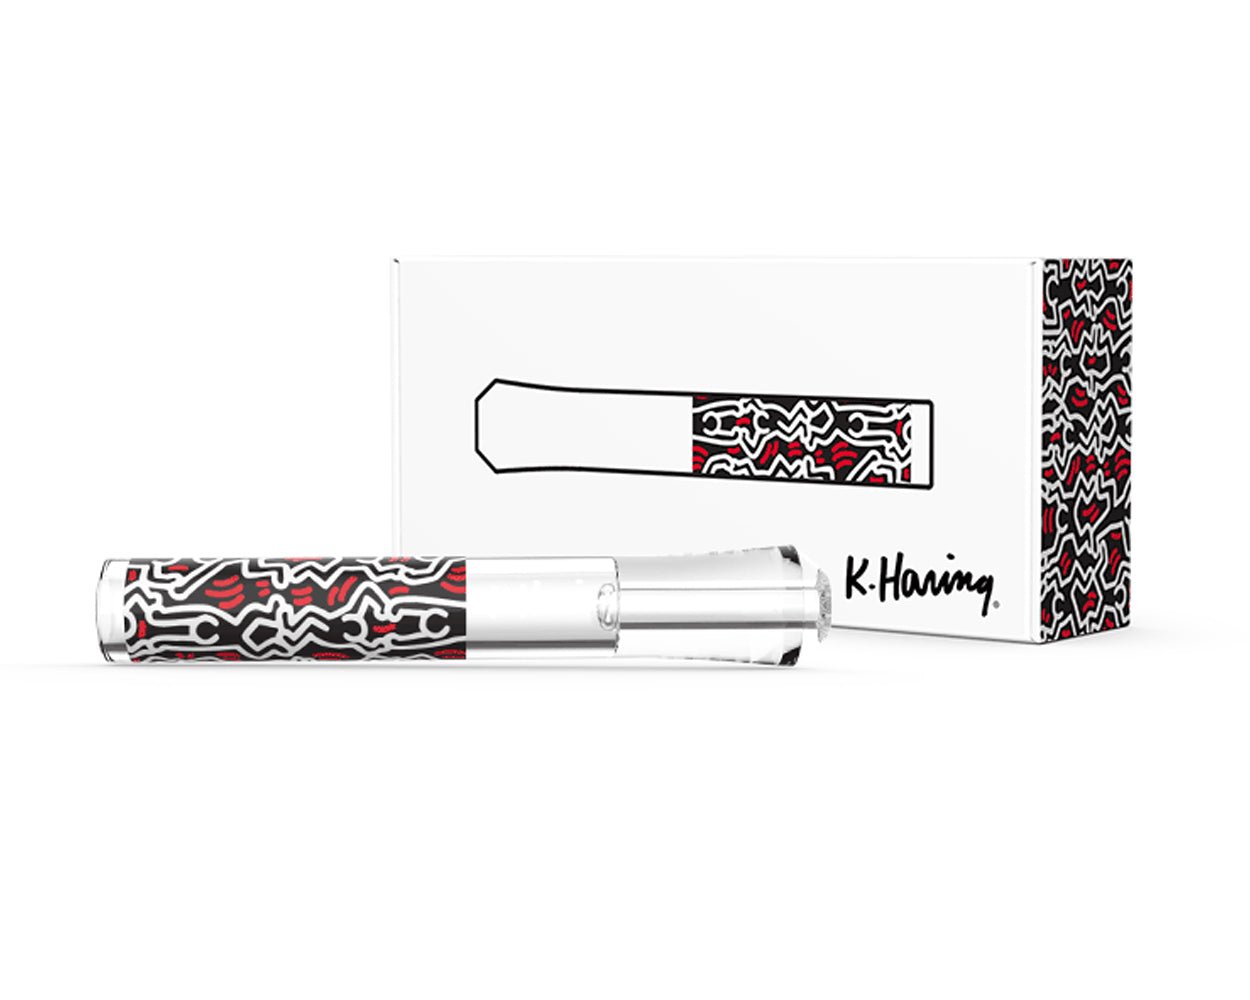 Keith Haring | Glass Taster Chillum Hand Pipe | 3in Long - Glass - Black & White - 6